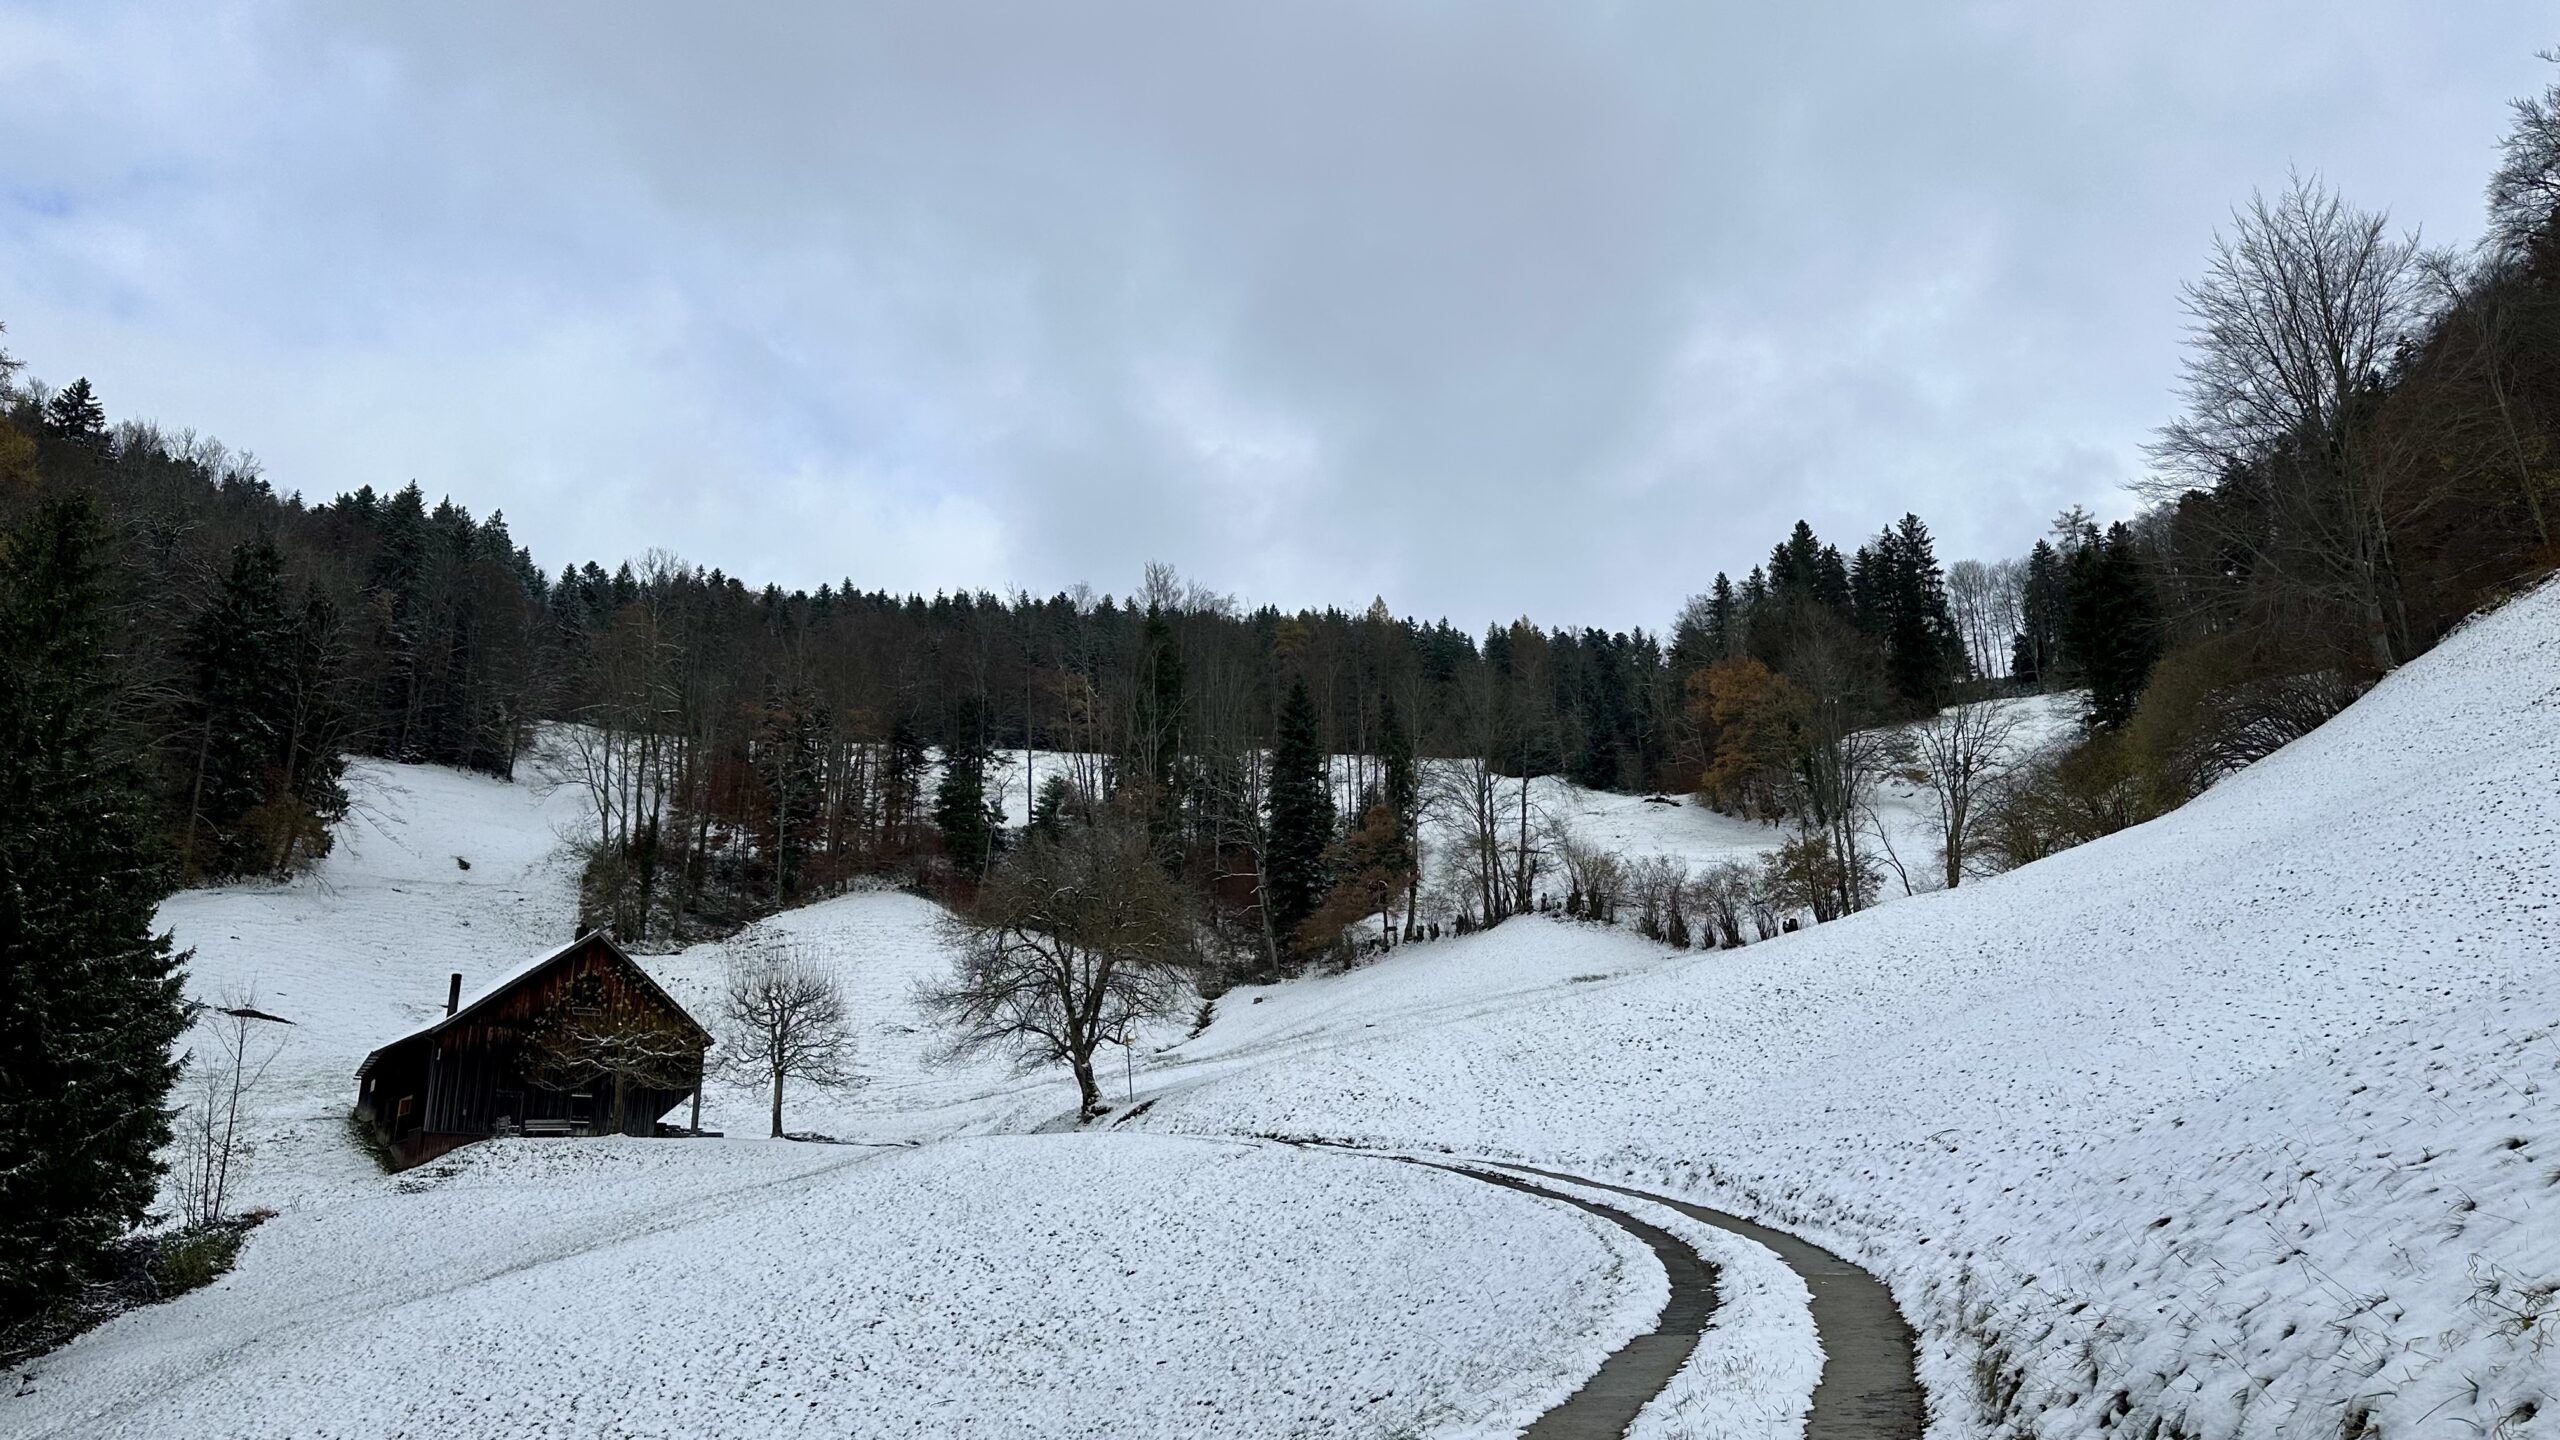 Dark wooden barn on a snowy slope halfway up to the White Cross. The landscape is a mix of pasture and forest. The barn is part of a sheep farm.